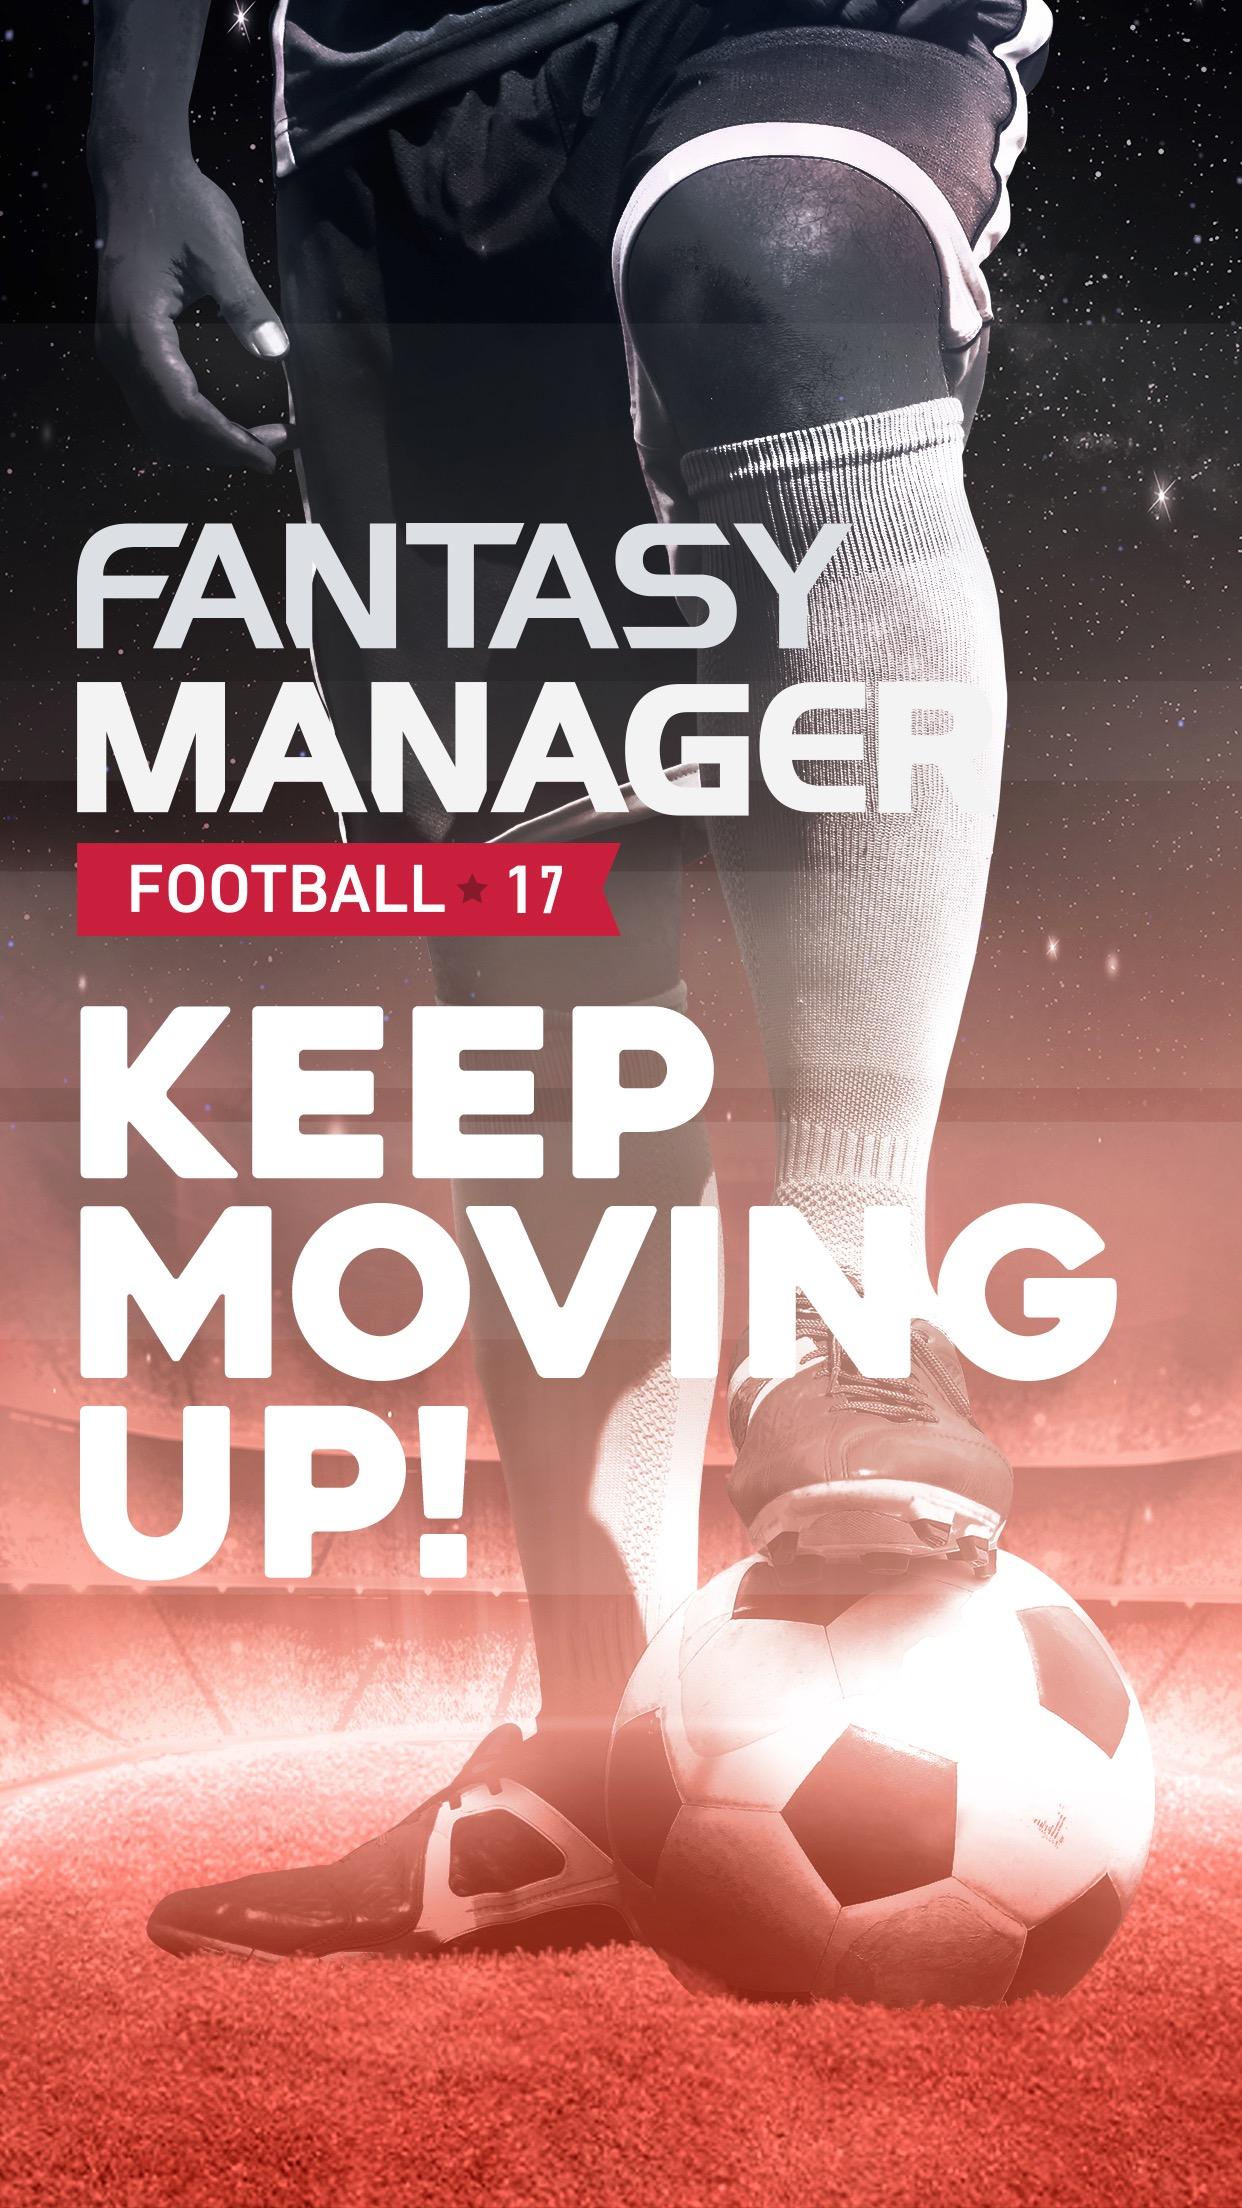 Android application PRO Soccer Cup Fantasy Manager screenshort